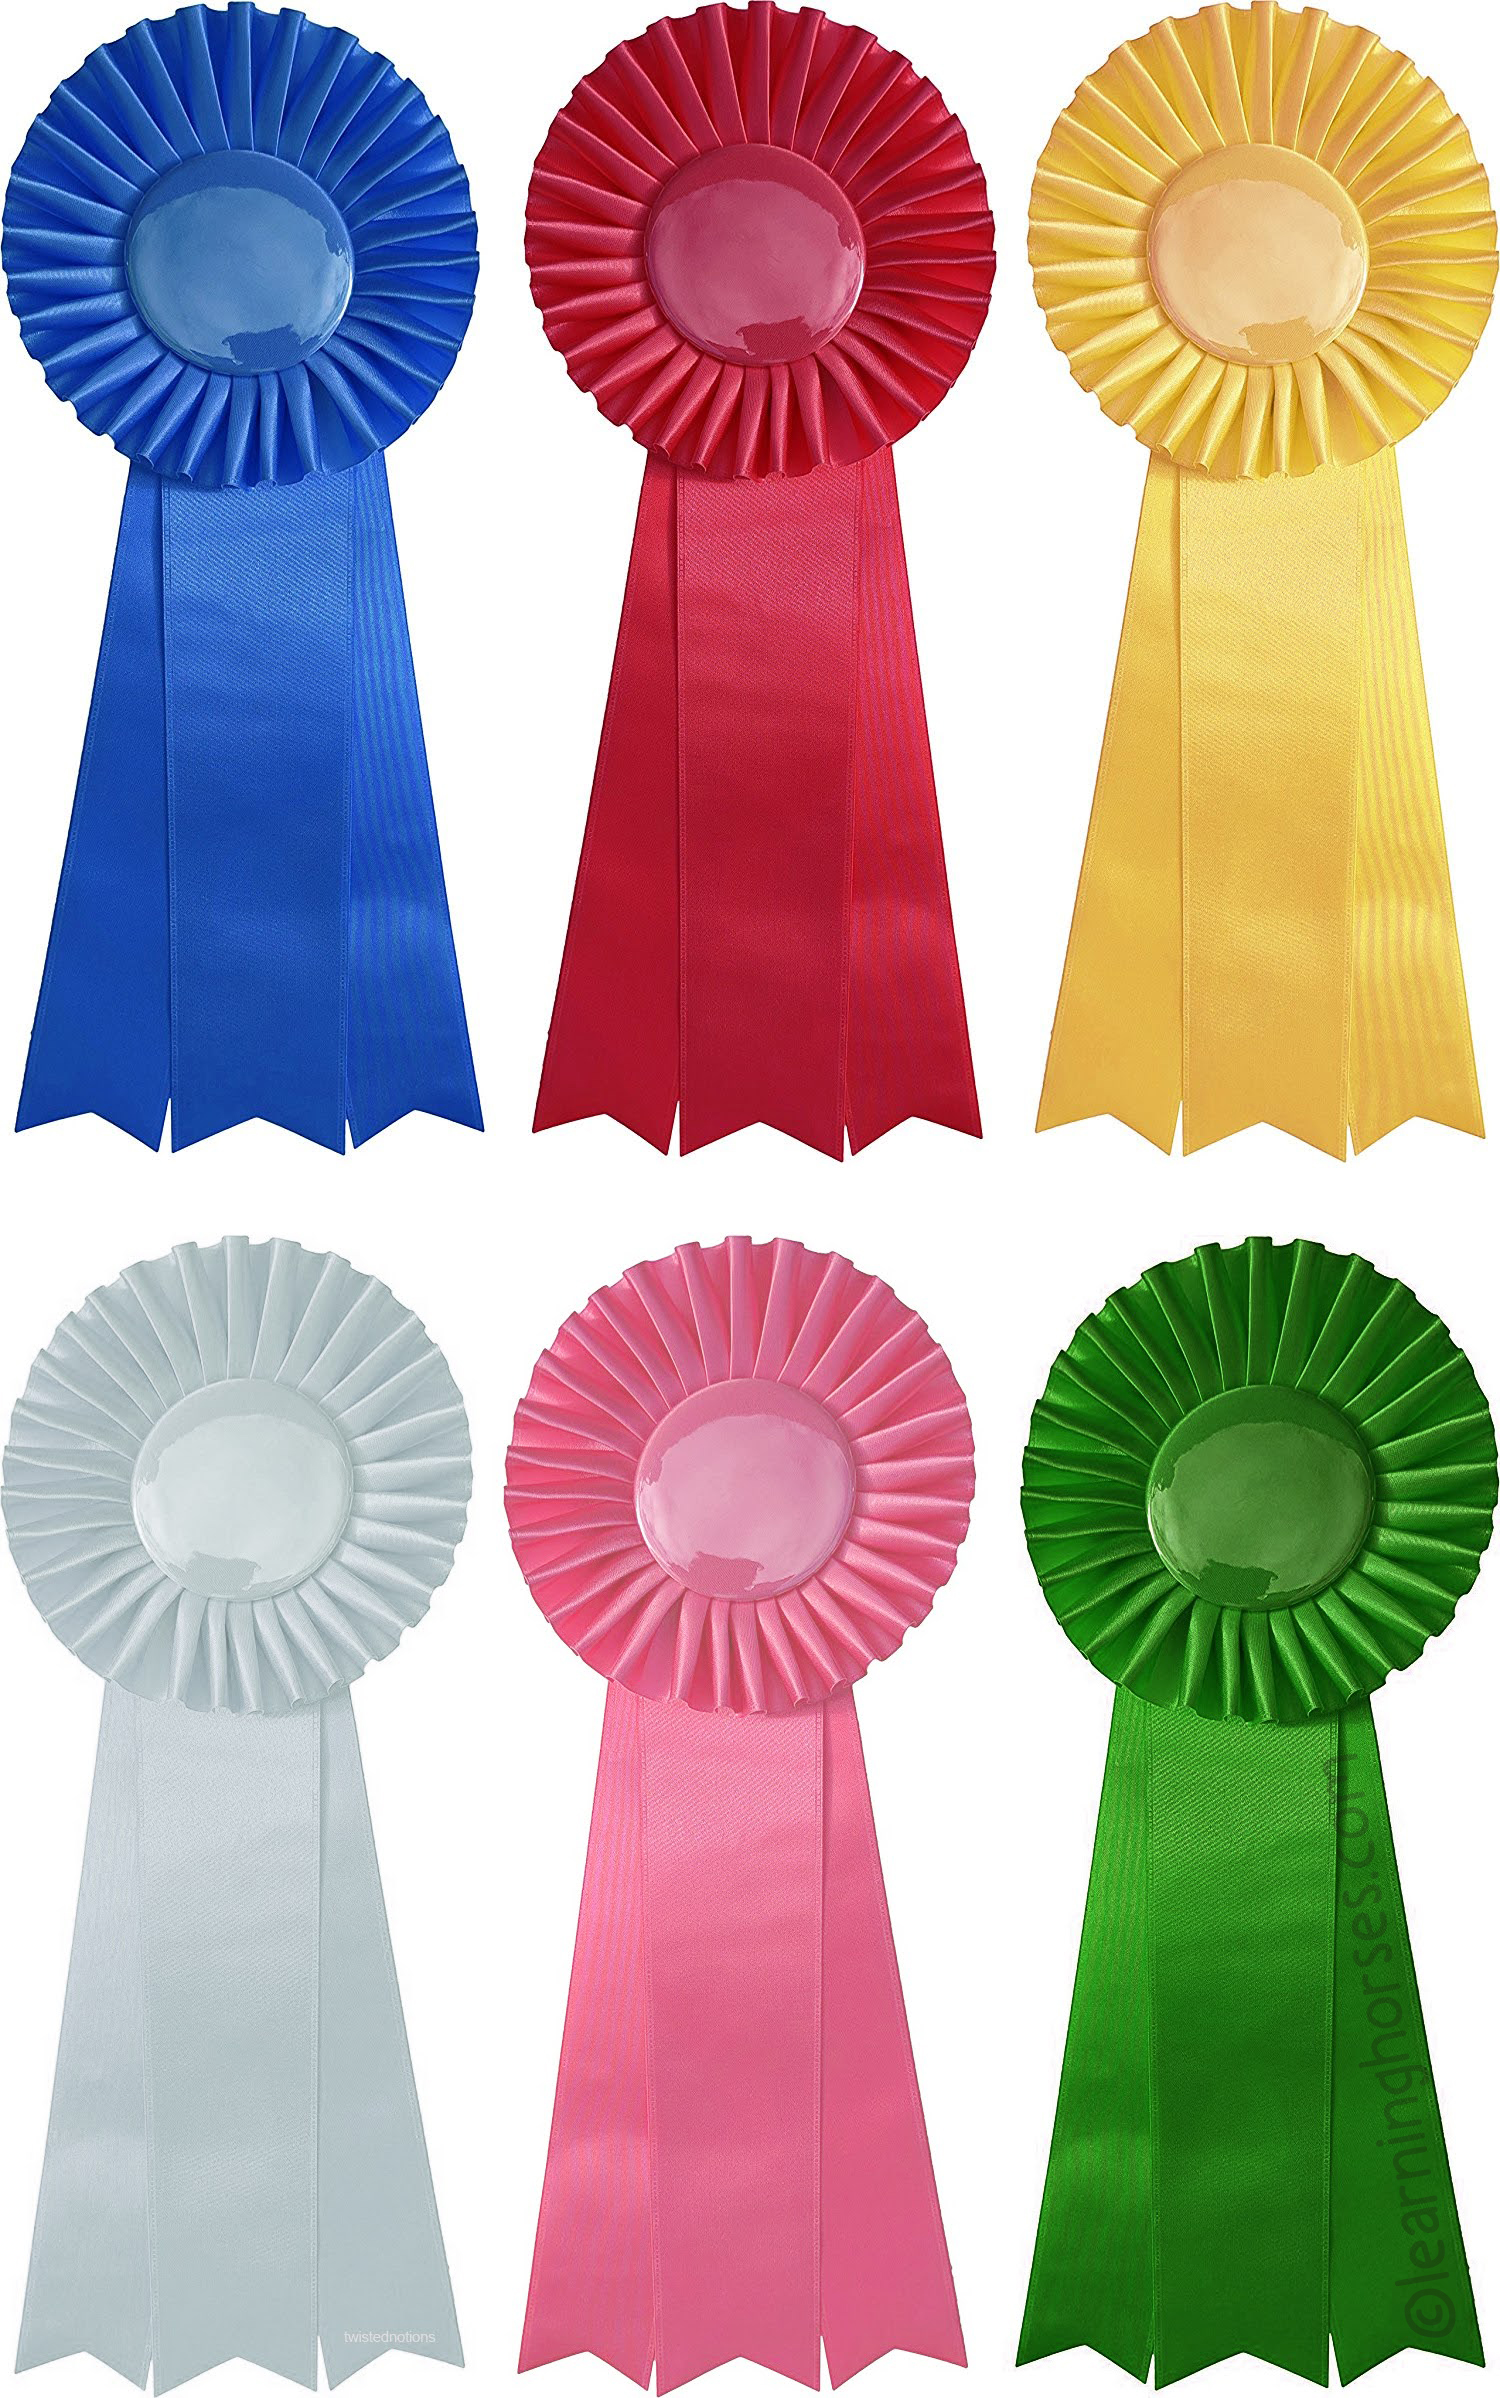 A lineup of horse show ribbons in order from first place to sixth place.